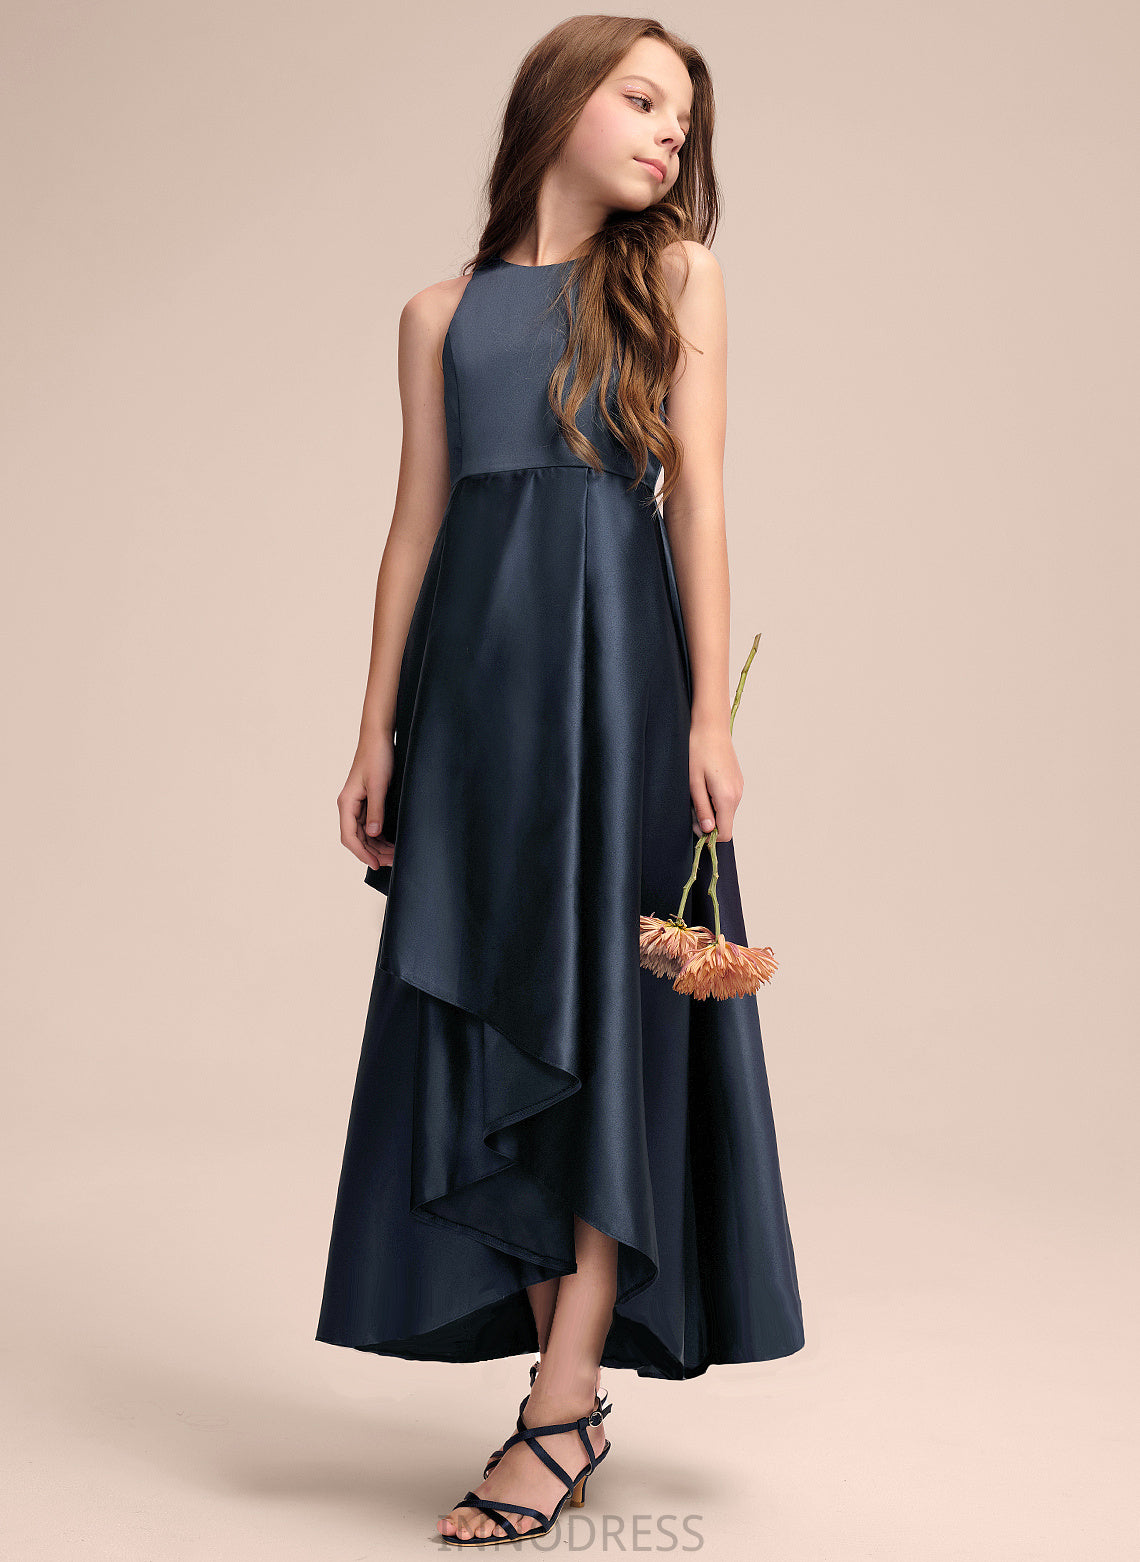 Satin With Junior Bridesmaid Dresses A-Line Neck Asymmetrical Cascading Ruffles Scoop Madilyn